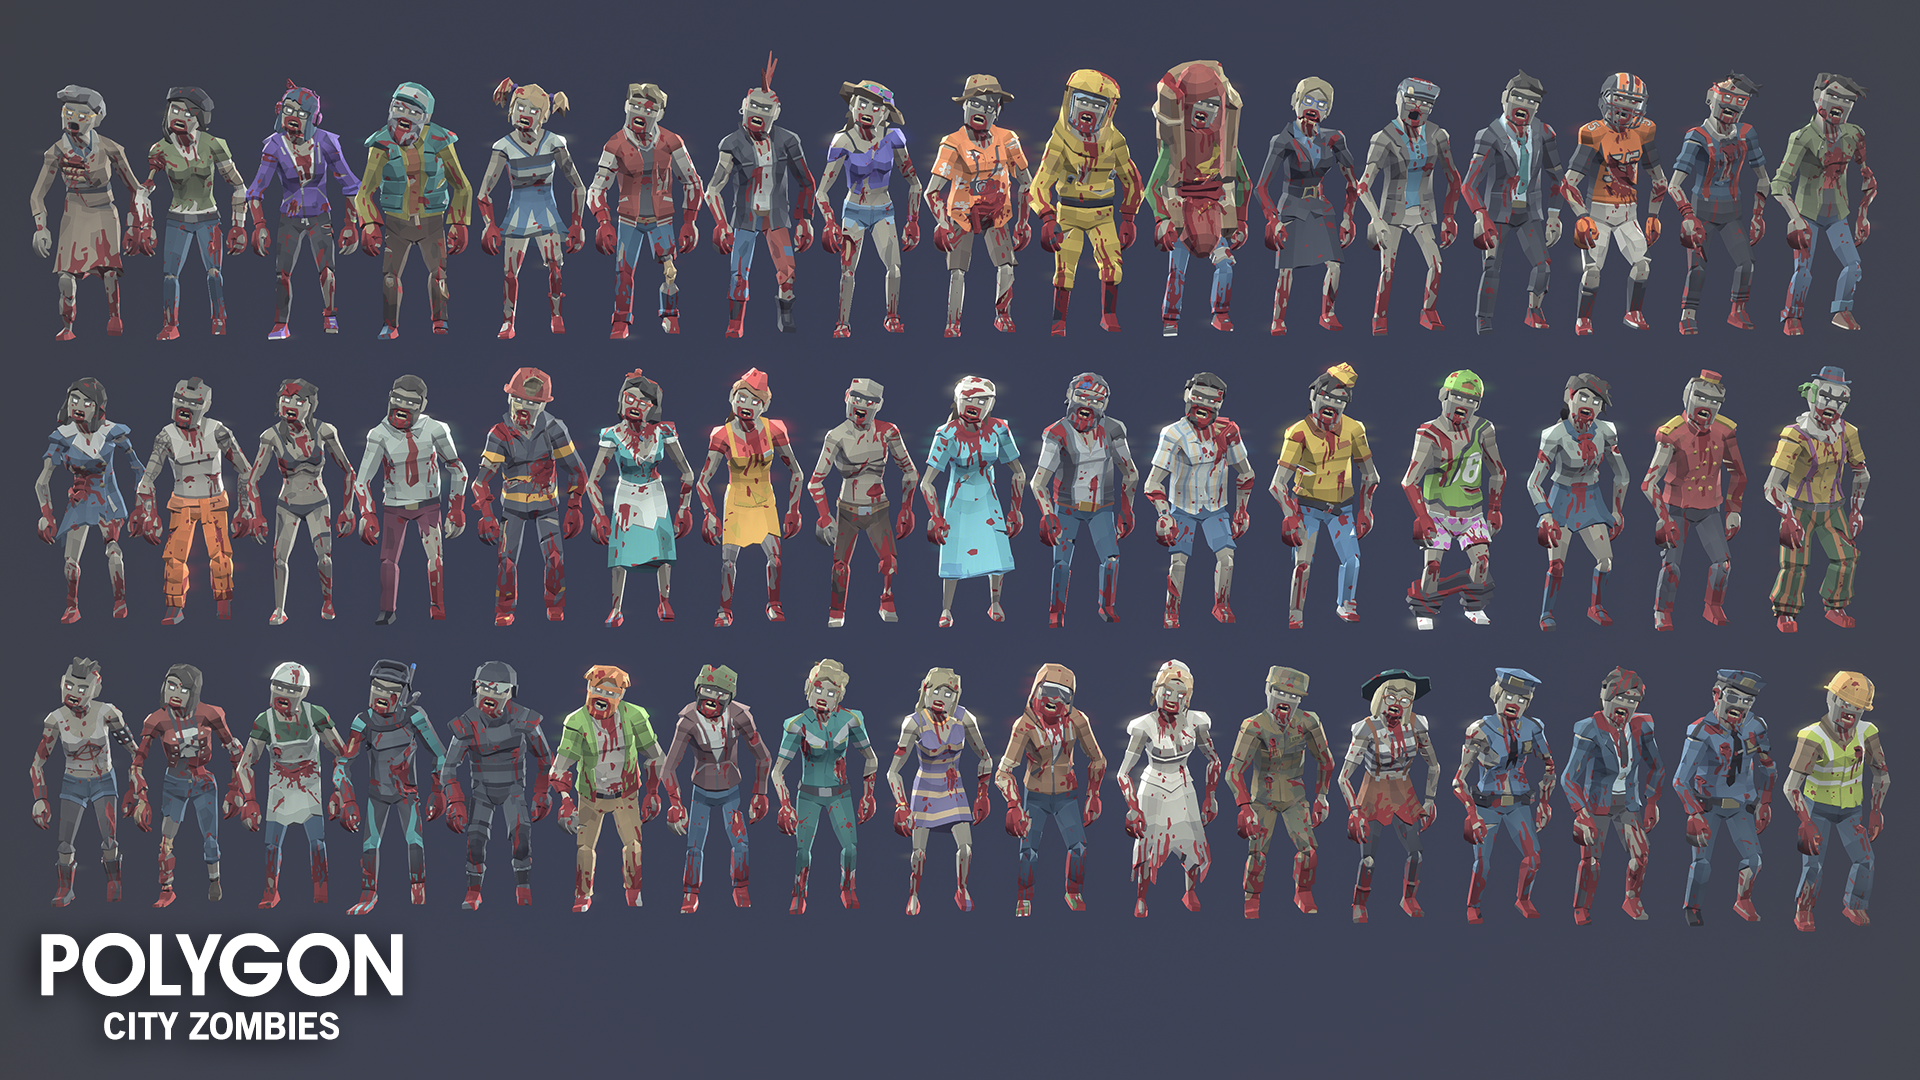 Zombie characters as part of the Polygon City ZOmbies pack